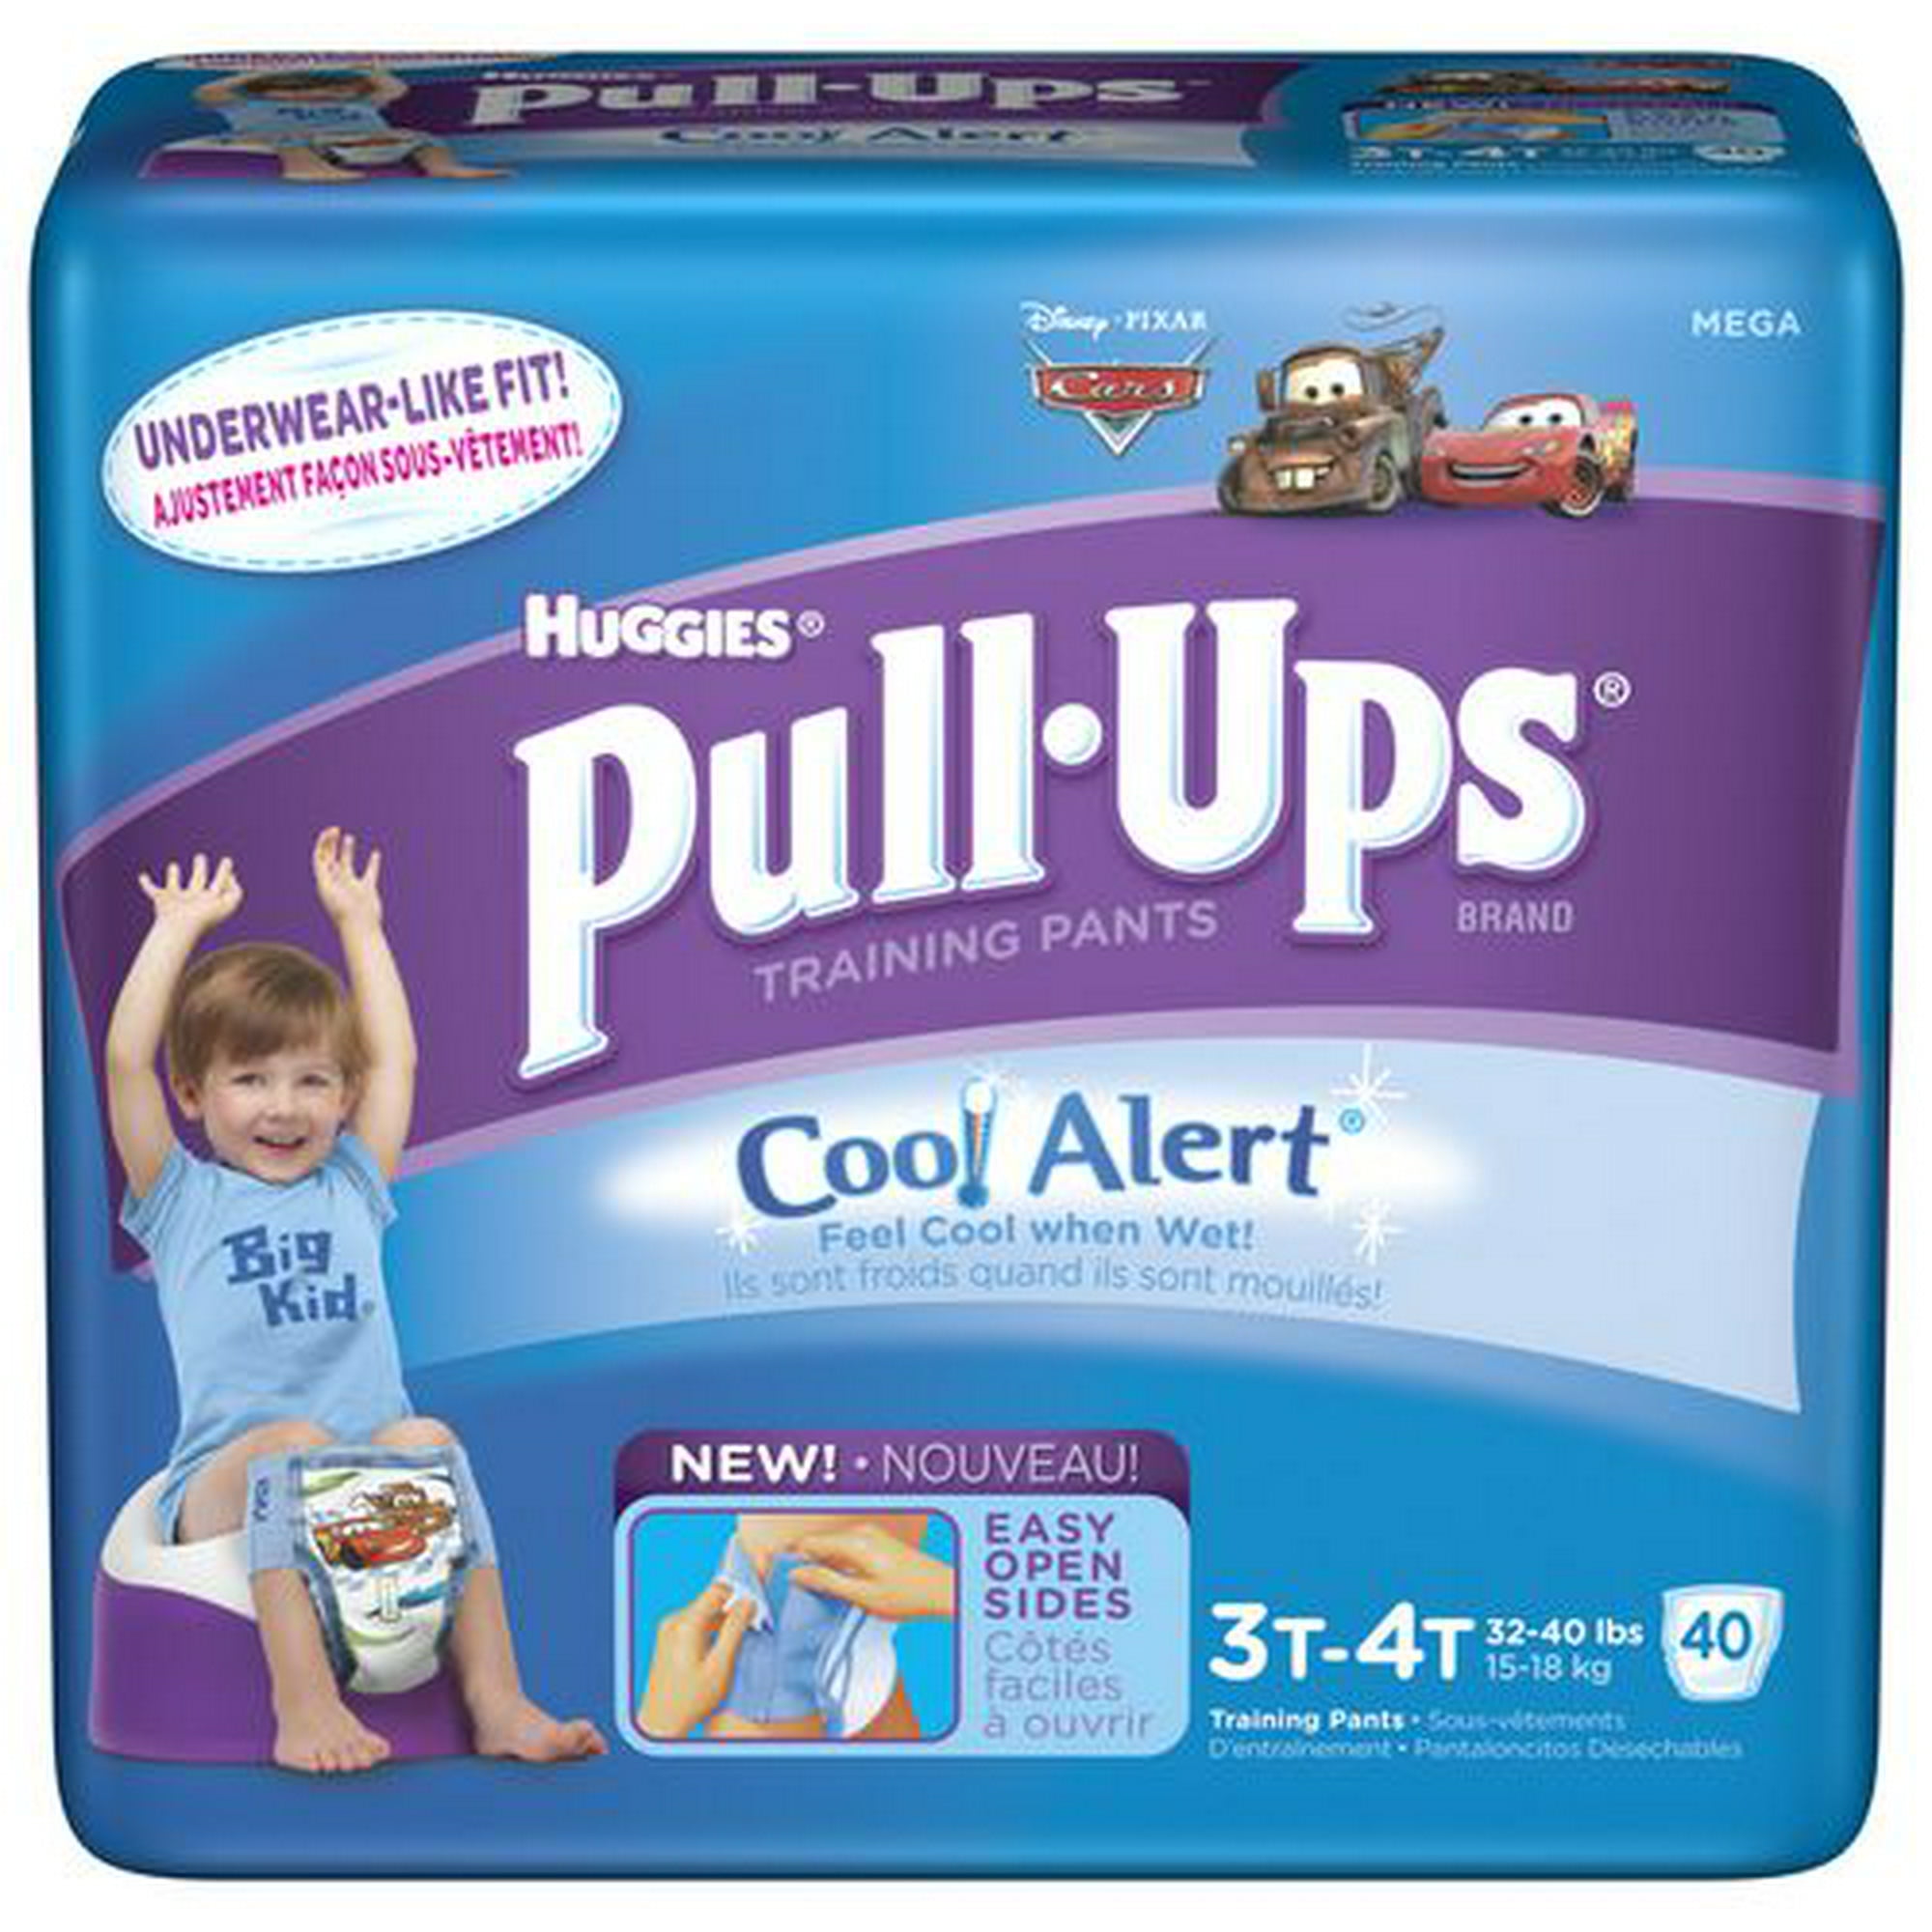 Huggies Pull-Ups Plus Training Pants For Boys Size 3T-4T: 32-40lbs